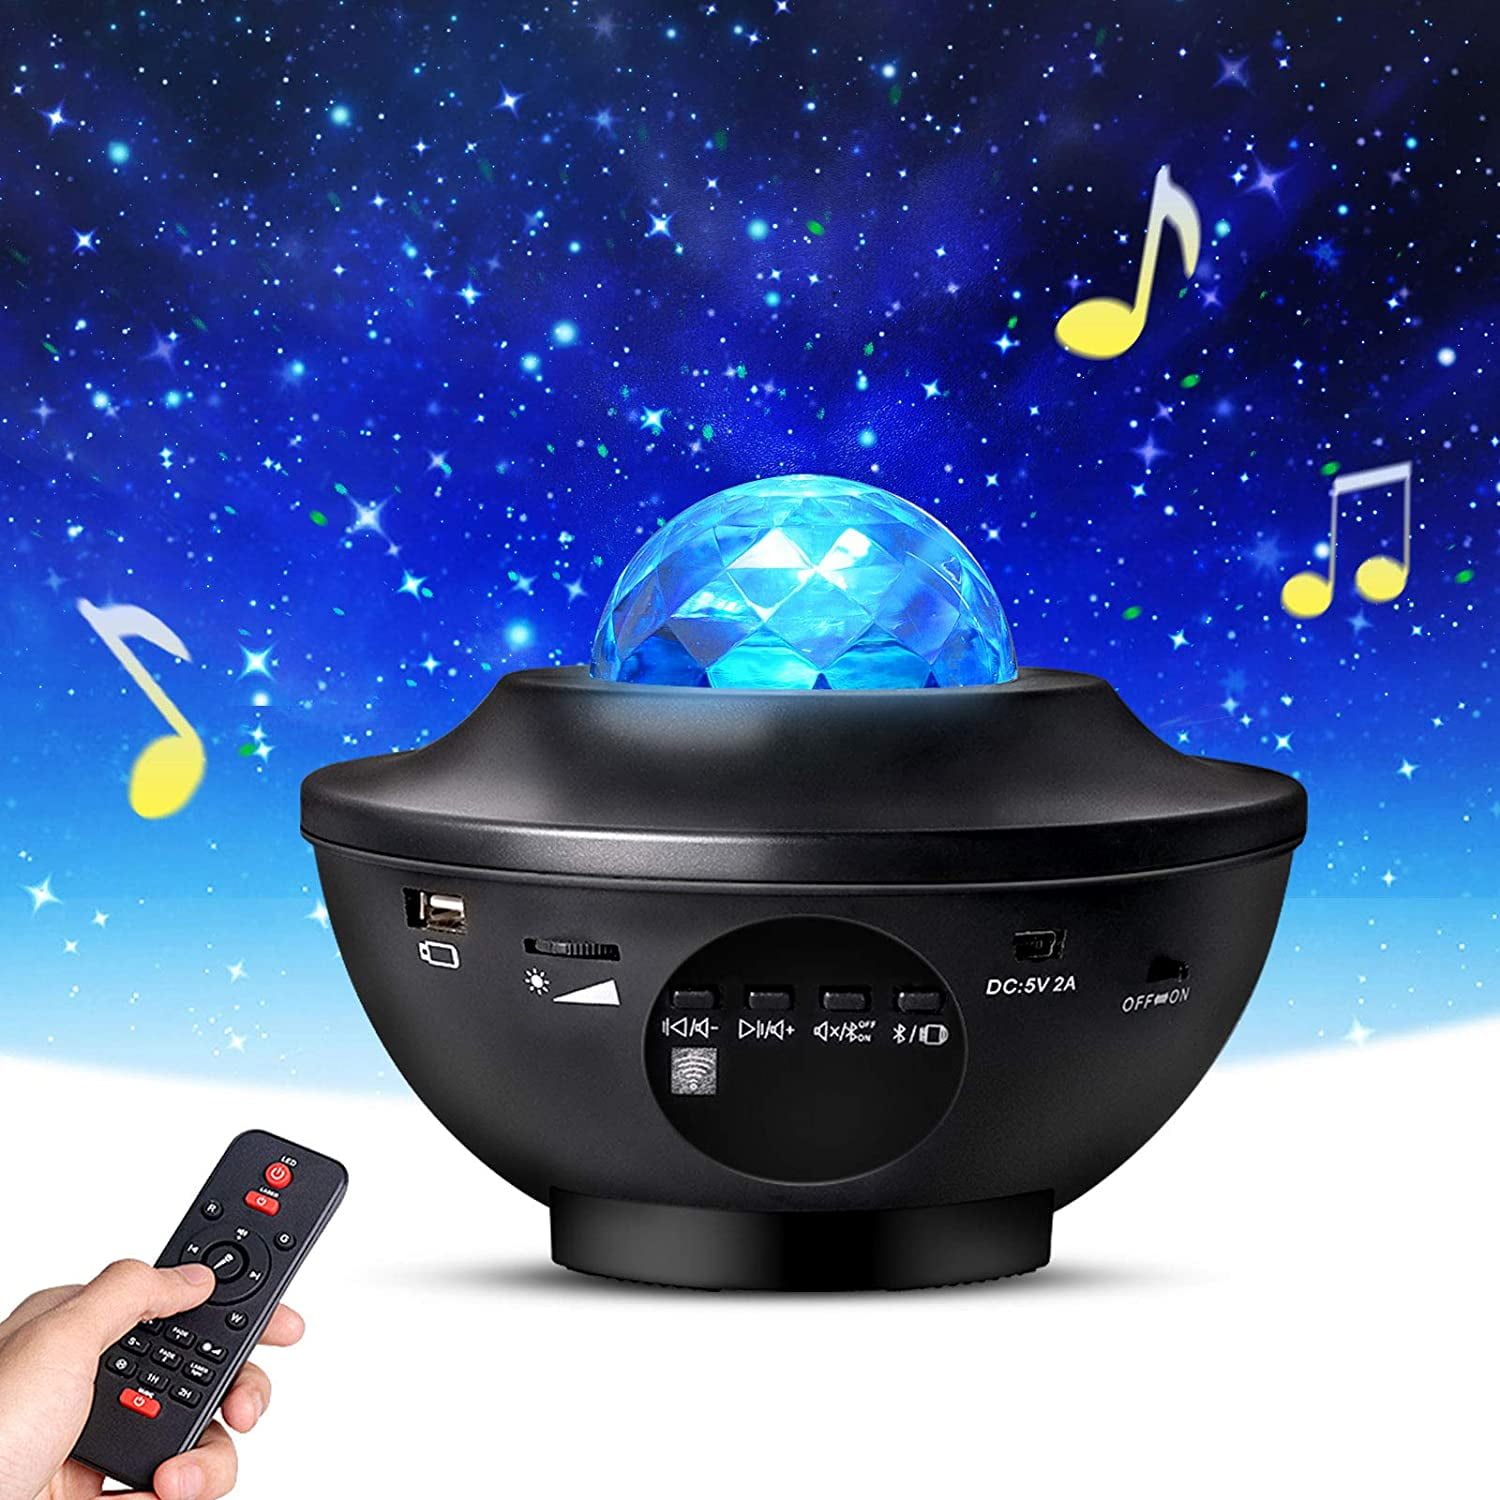 LED Galaxy Starry Night Lamp Projector Sky Star Ocean Party Speaker Light Remote 